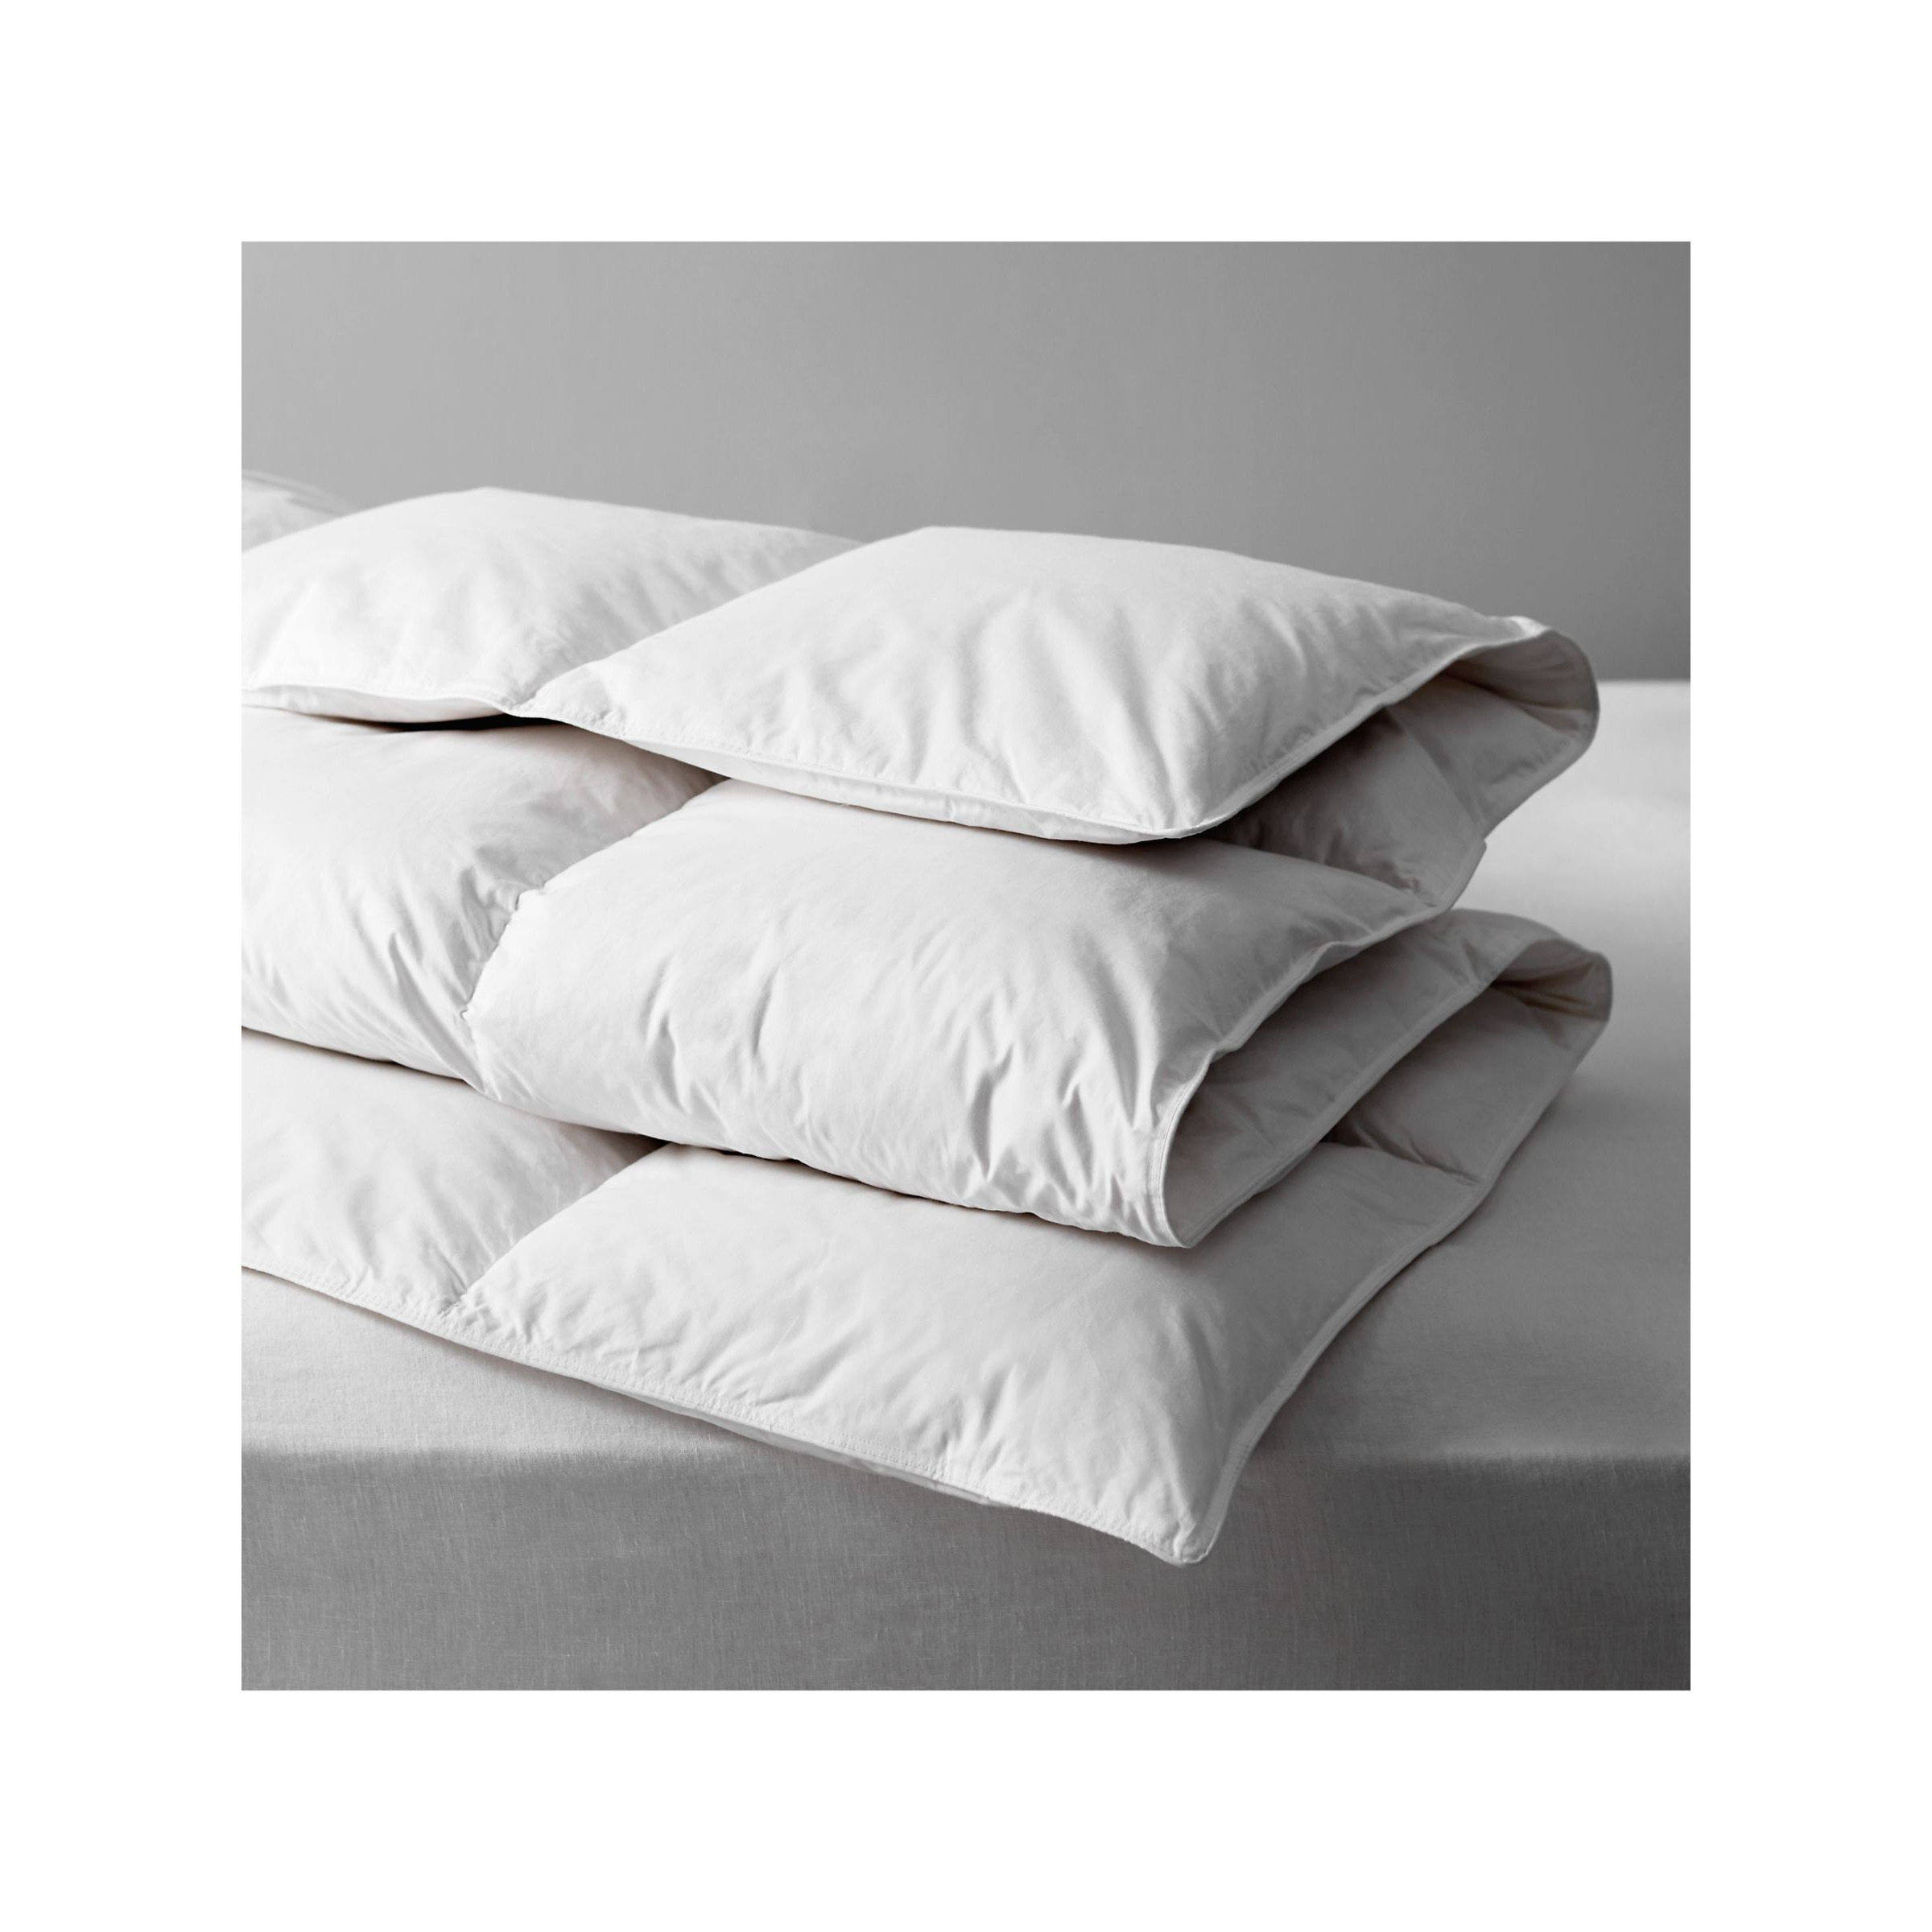 John Lewis Natural Duck Feather and Down Duvet, 10.5 Tog - image 1